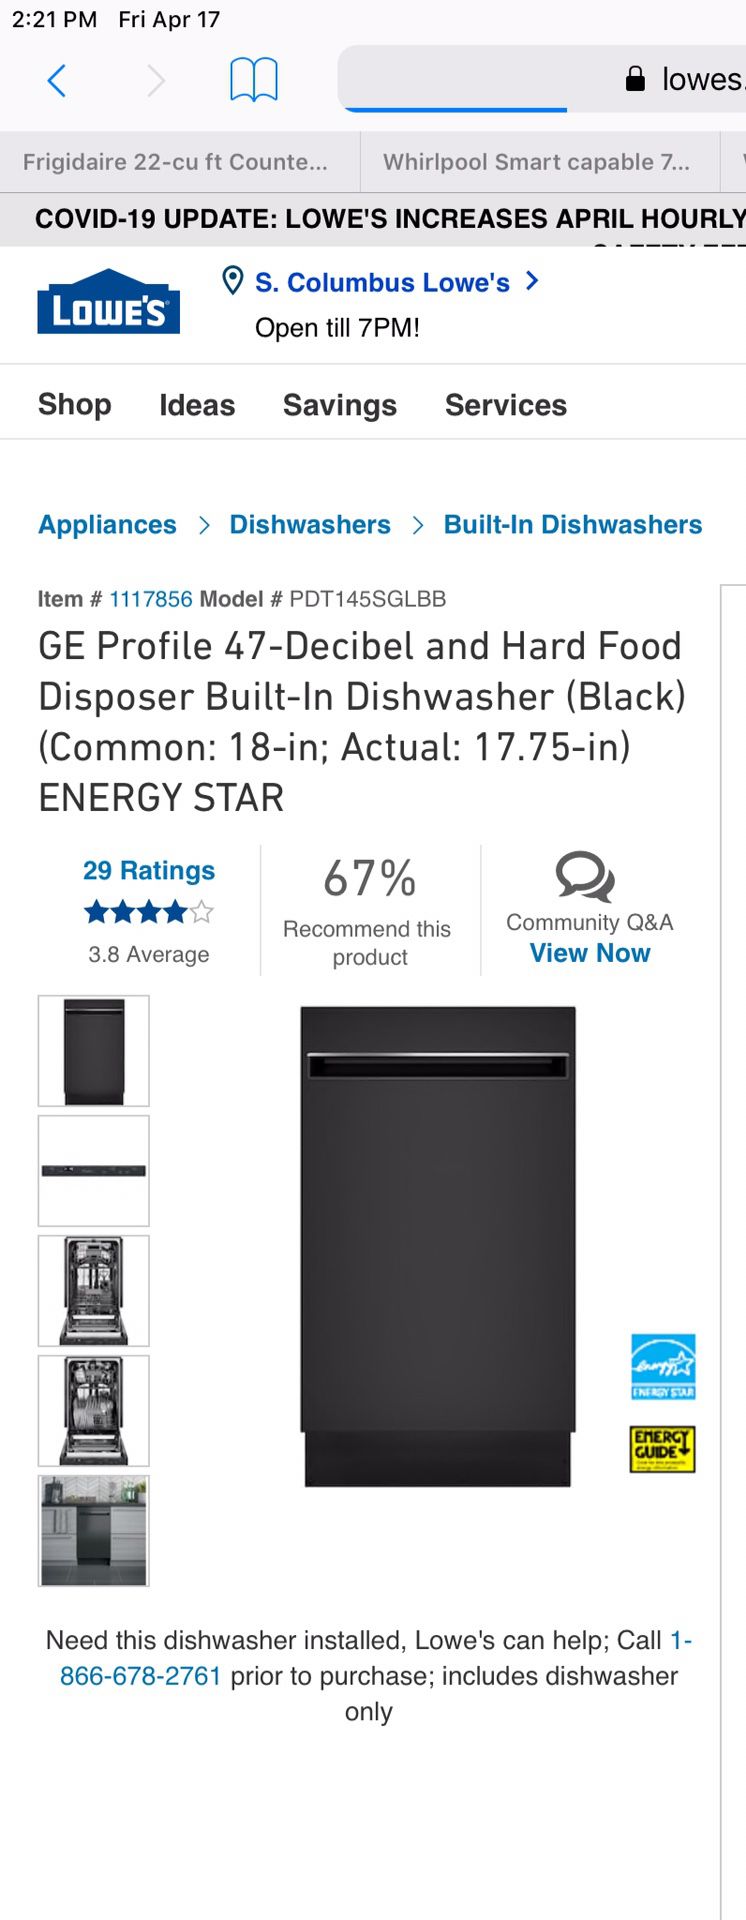 GE dishwasher $499 by appointment